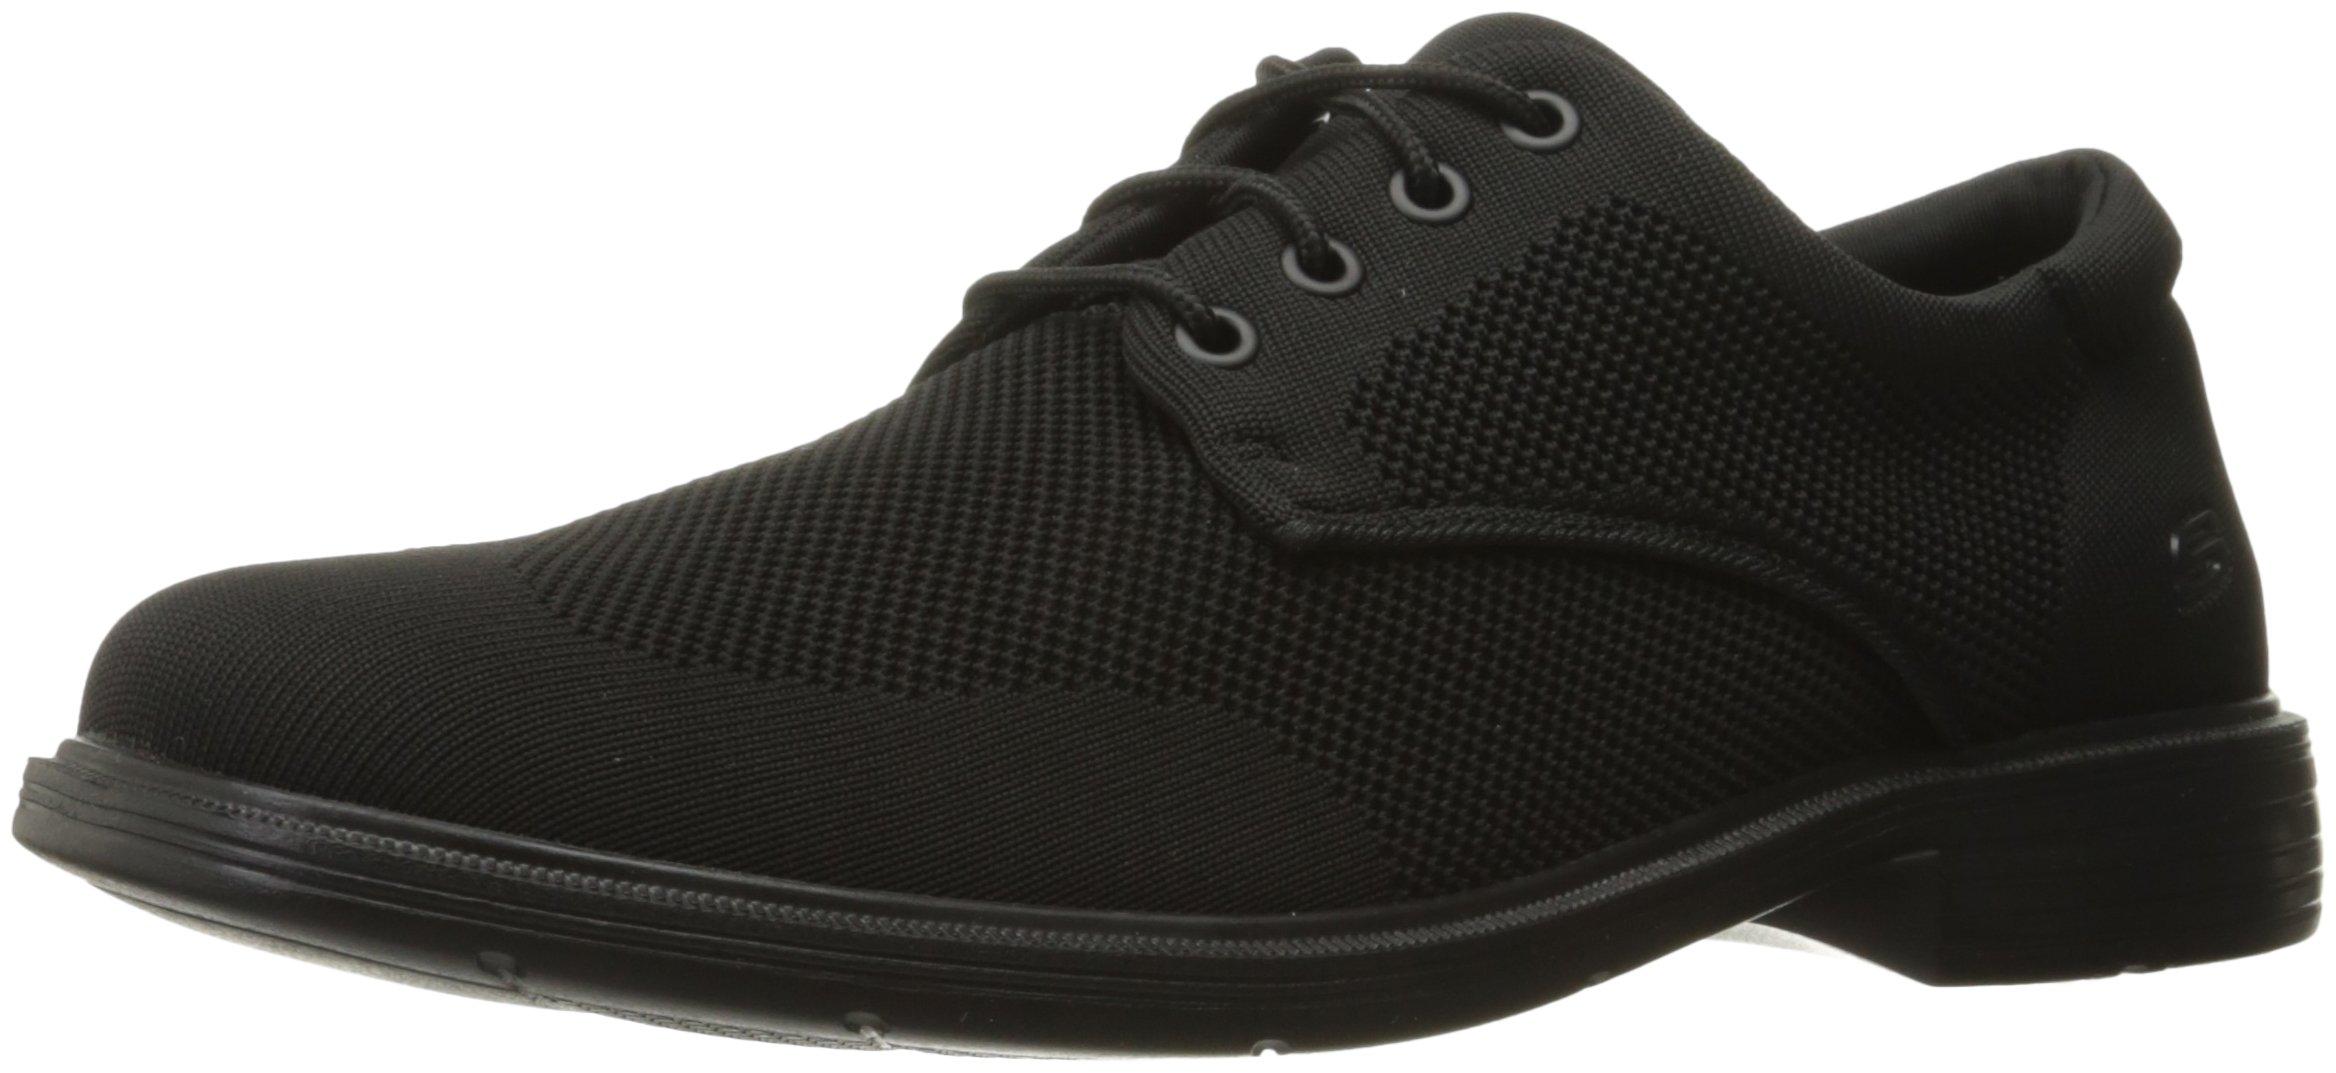 Skechers Usa Caswell Aleno Oxford,black,10.5 2w Us for Men | Lyst